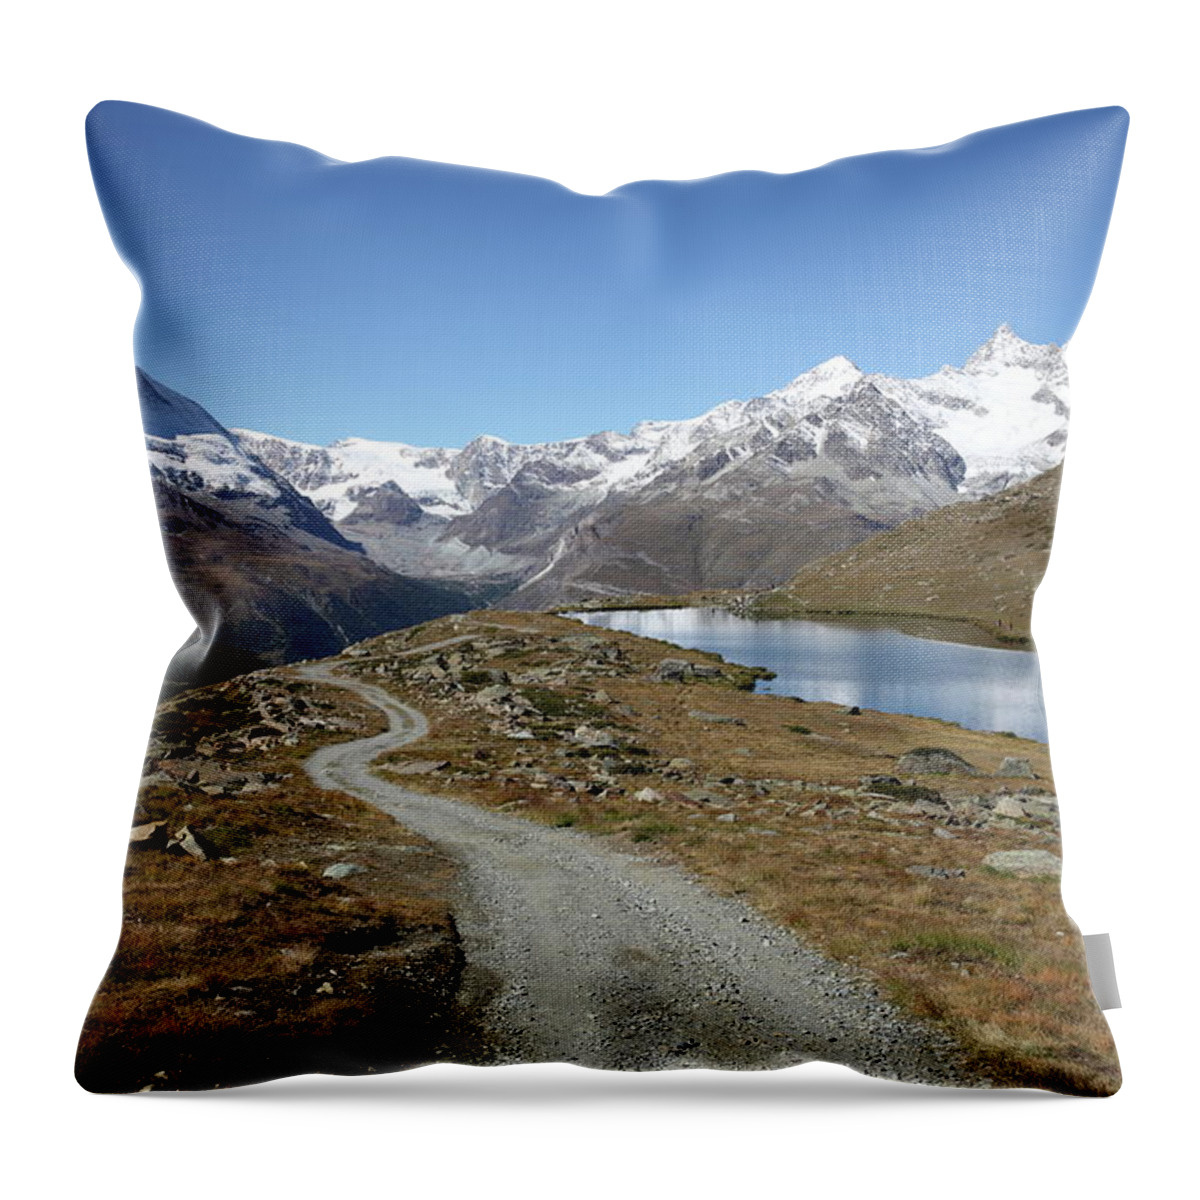 Scenics Throw Pillow featuring the photograph Matterhorn by Chung-chi Lo